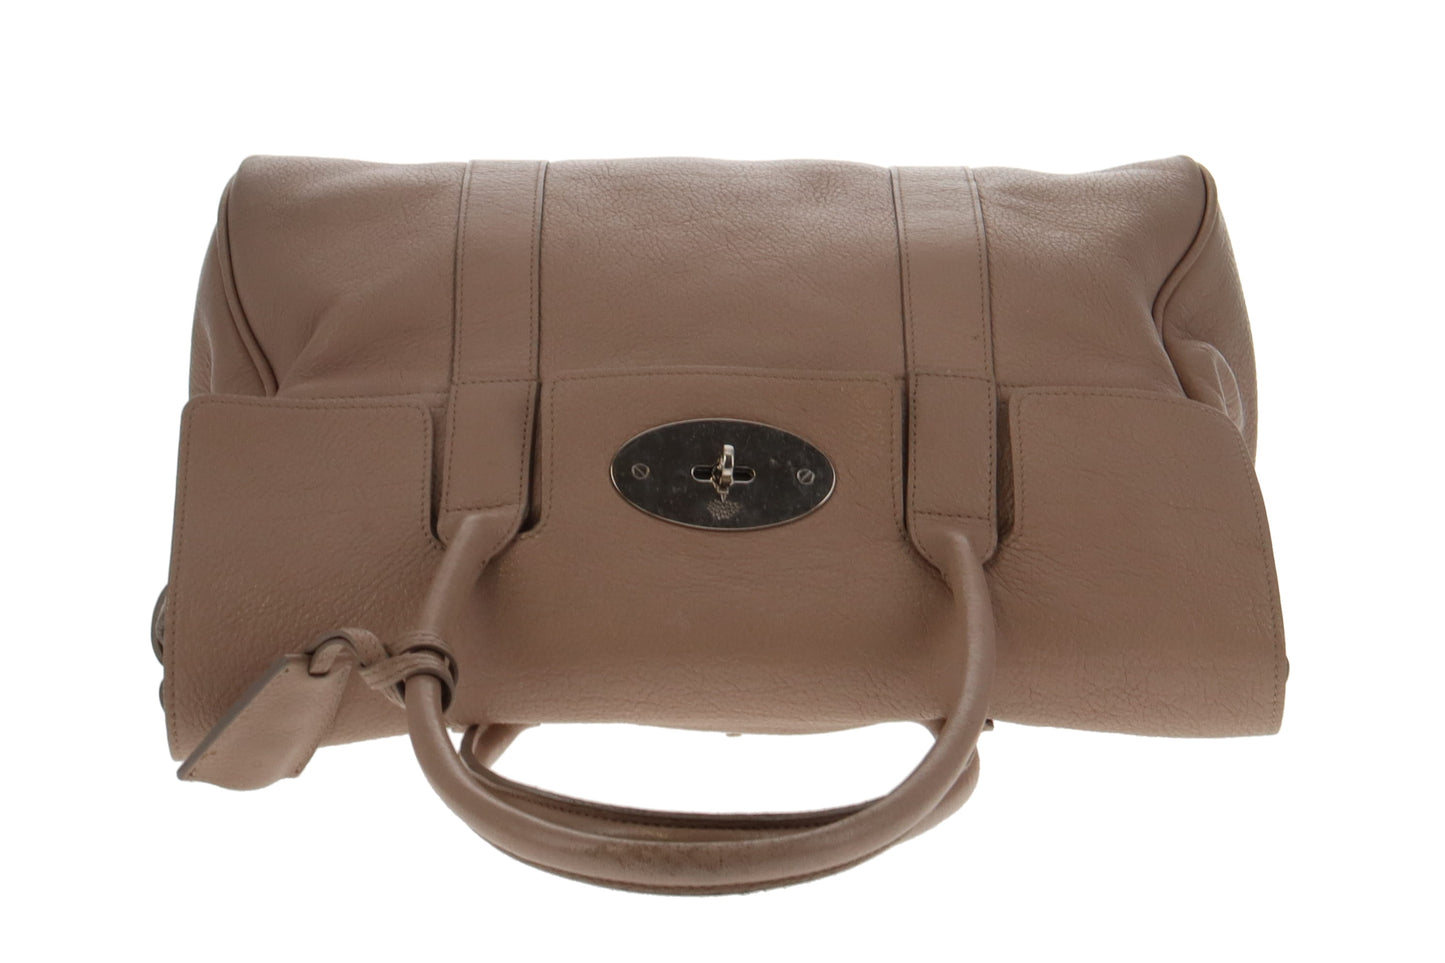 Mulberry Bayswater Putty With Nickle Hardware